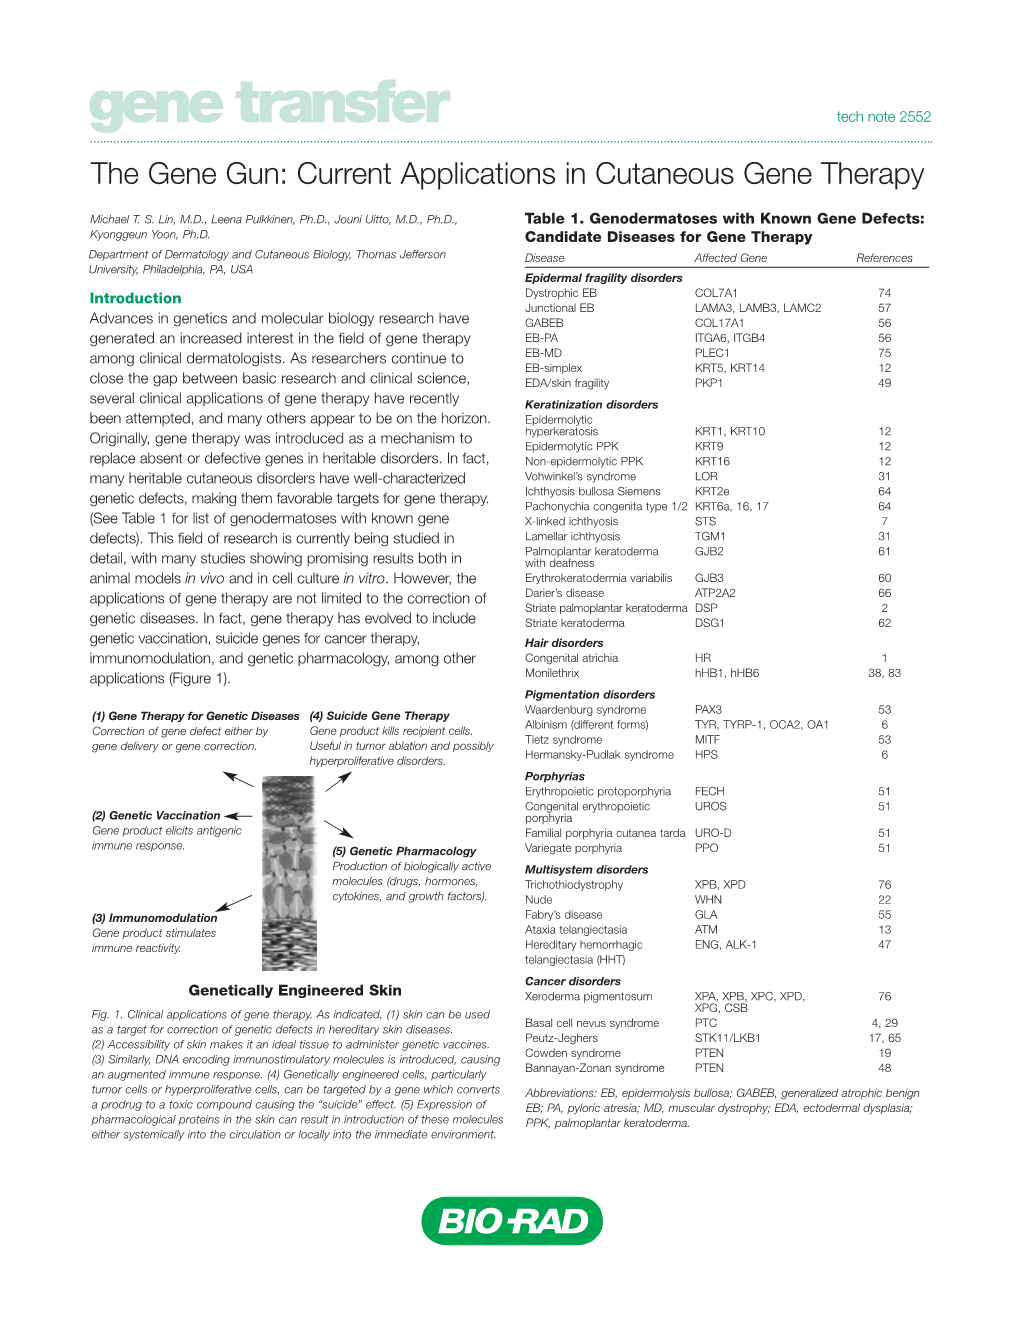 Gene Transfer Tech Note 2552 the Gene Gun: Current Applications in Cutaneous Gene Therapy